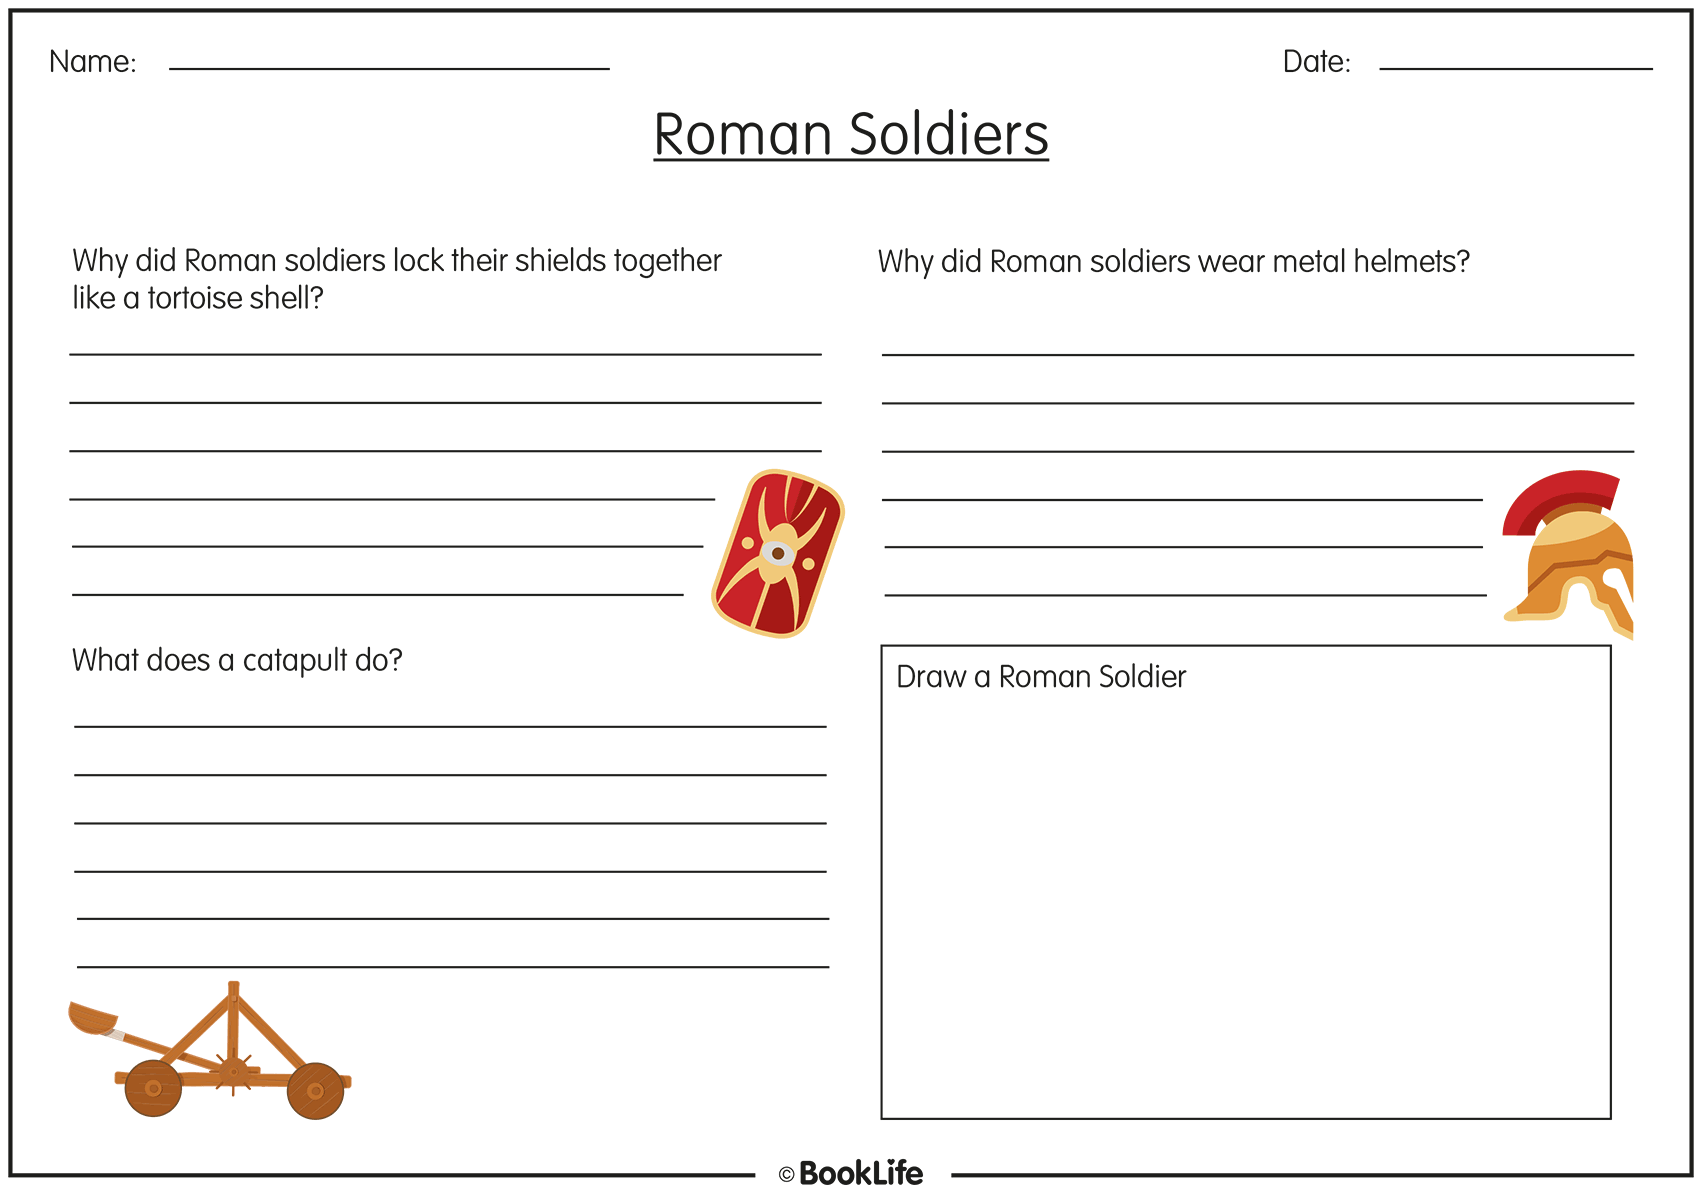 Roman Soldiers by BookLife